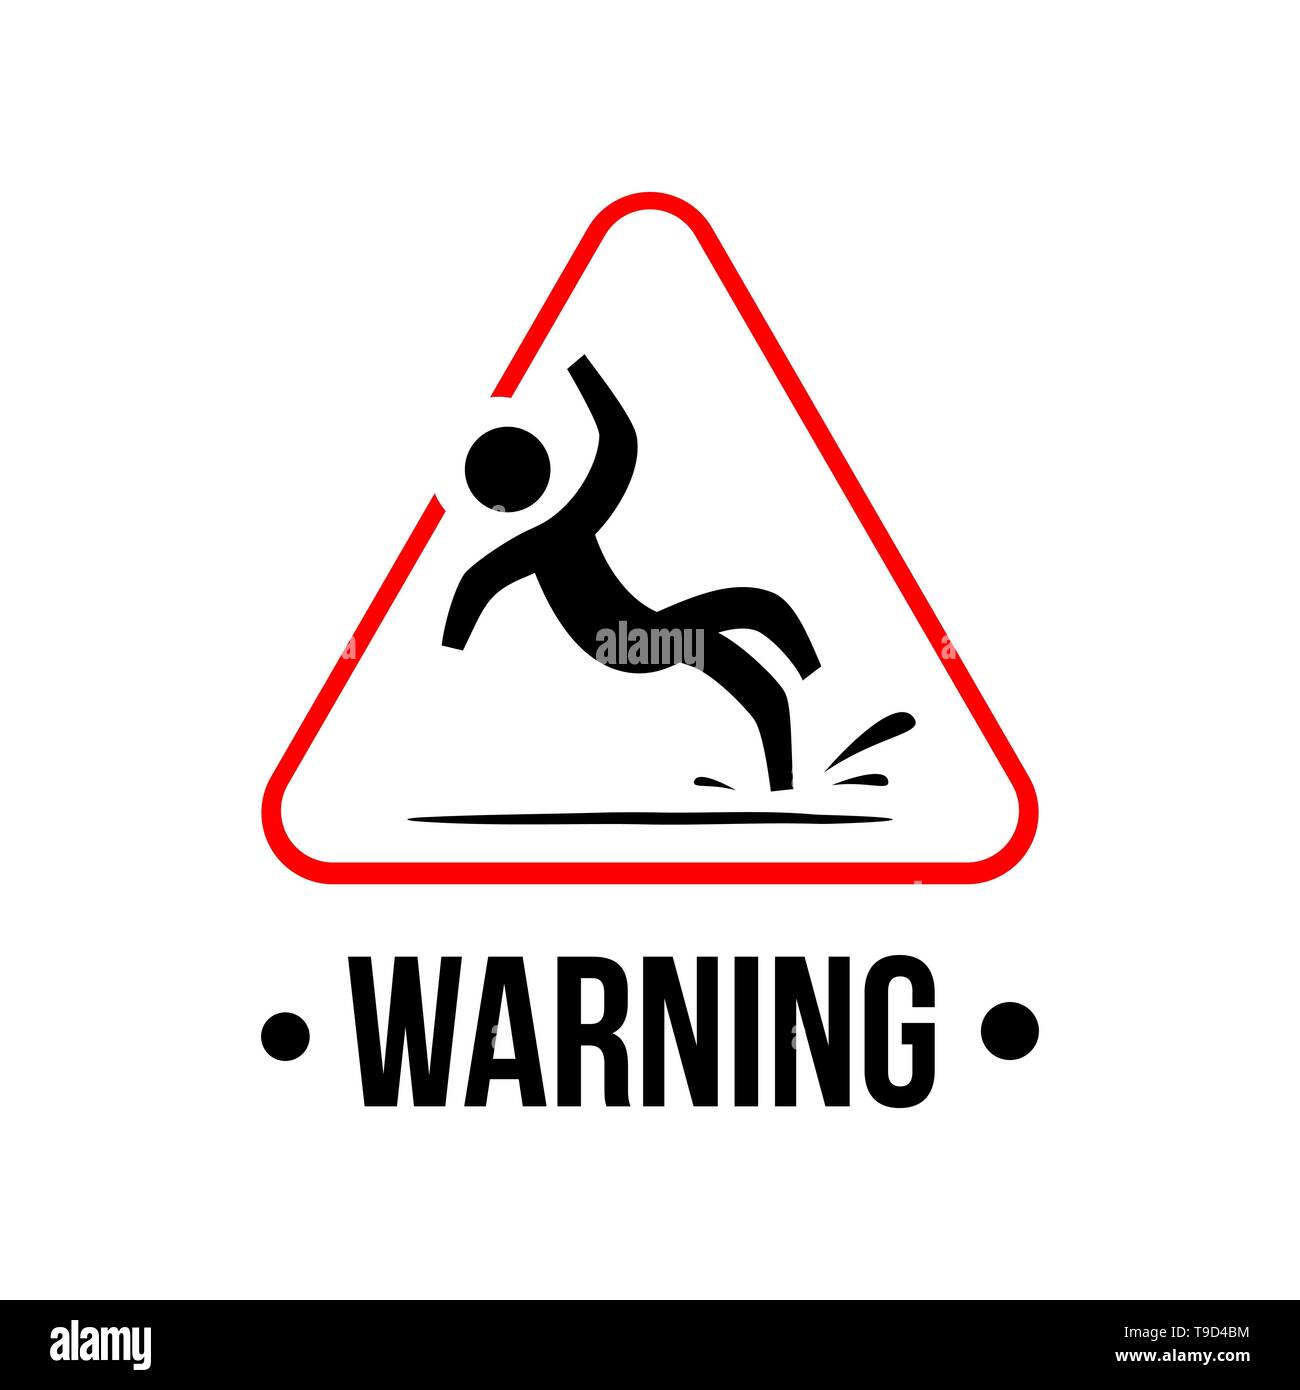 Wet Floor sign. yellow triangle with falling man in modern rounded style.  slippery floor triangle yellow sign. caution warning beware danger. Stock Vector